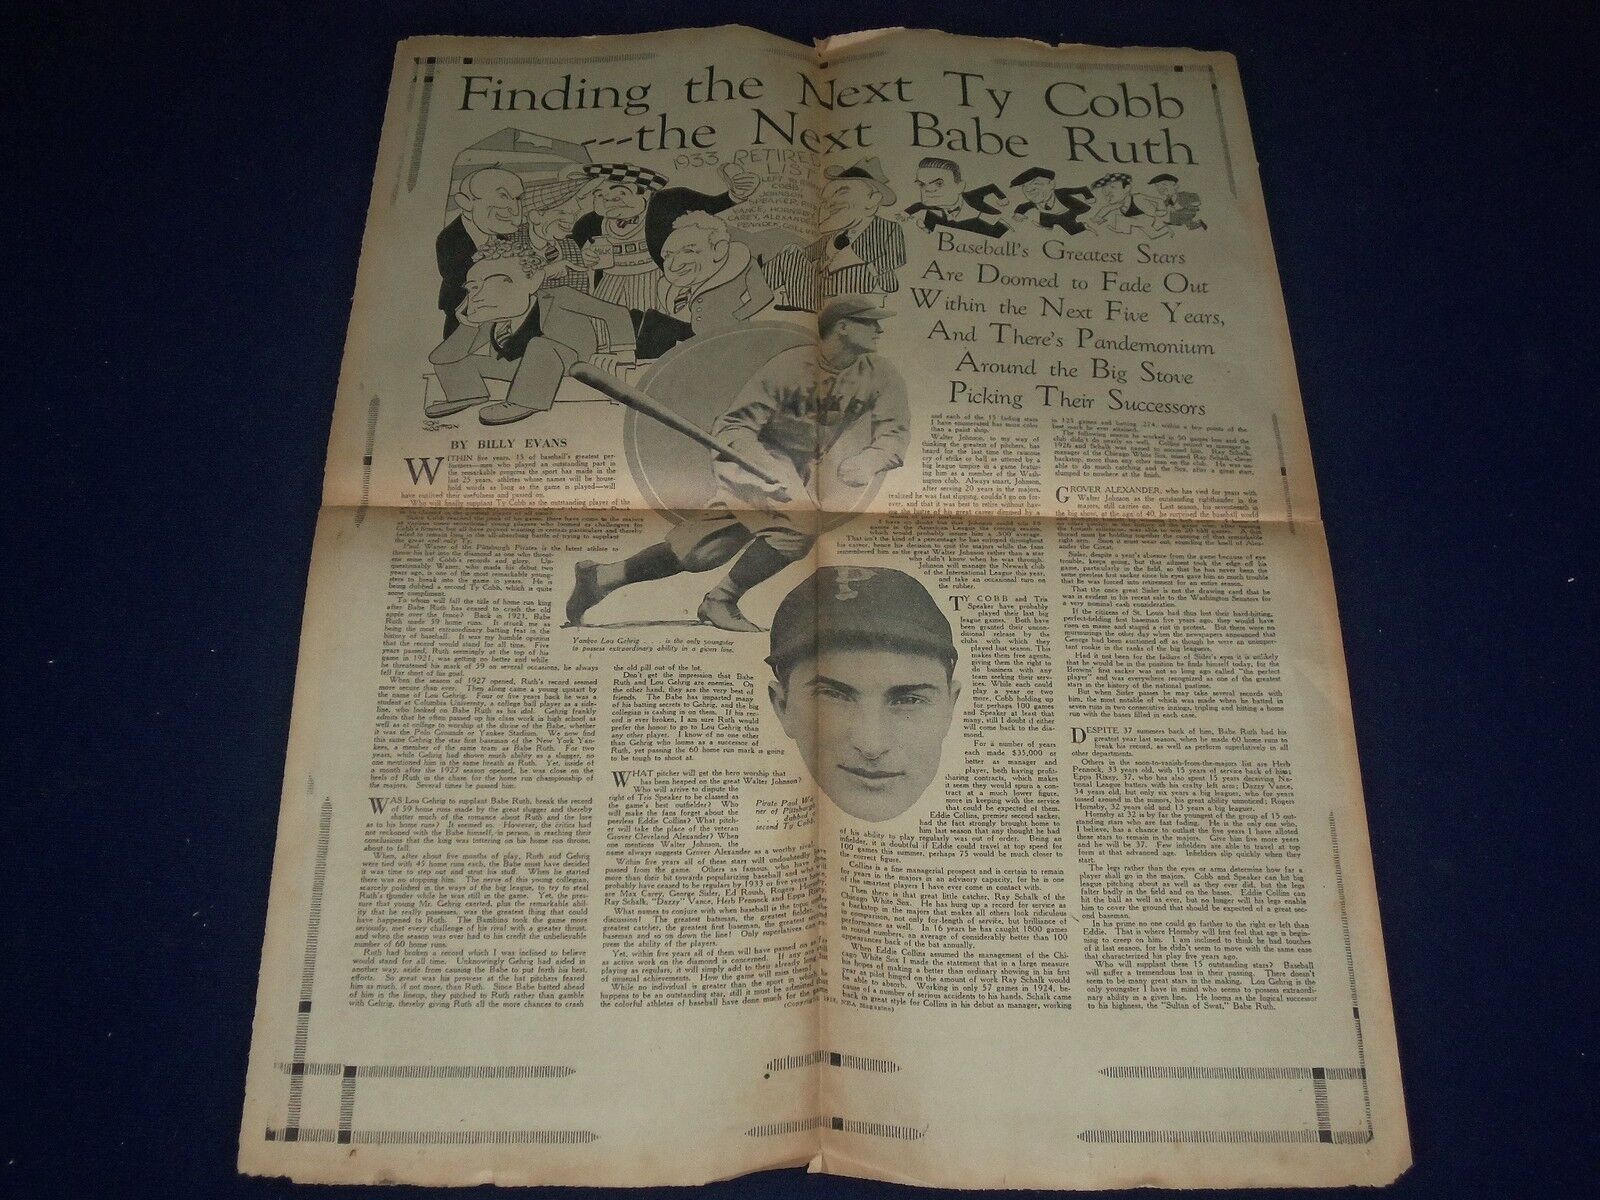 1928 SEP HOUSTON PRESS PAGE - FINDING THE NEXT TYCOBB & NEXT BABE RUTH - NP 972L